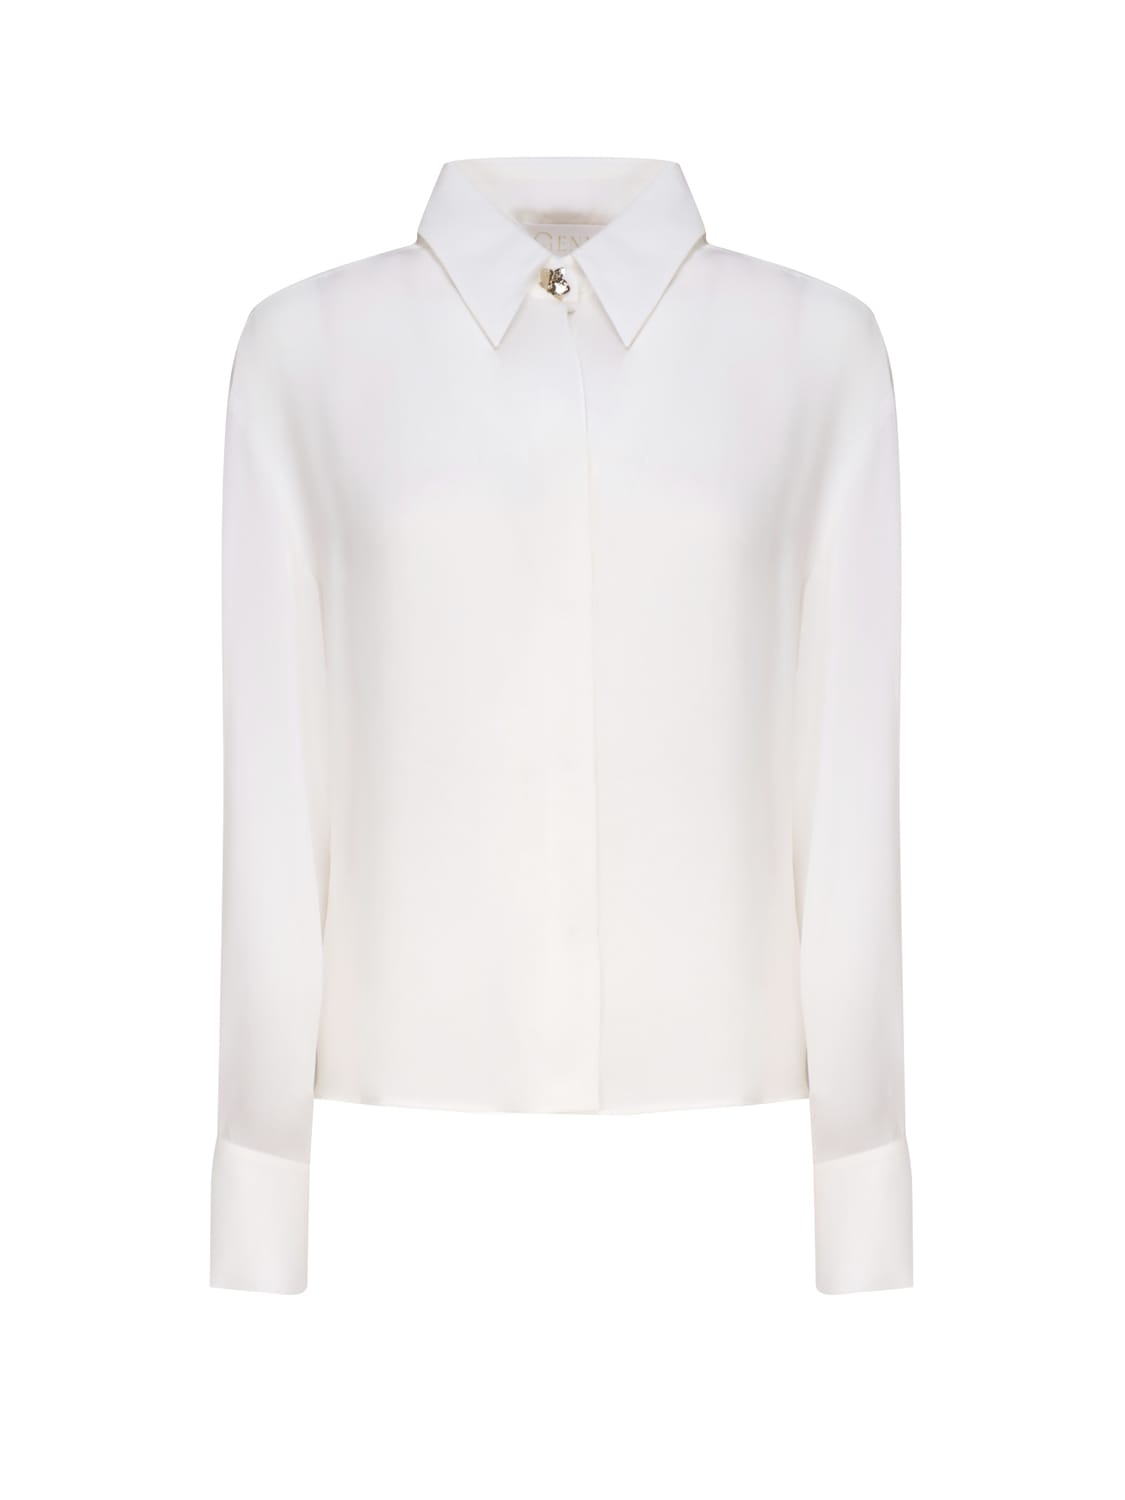 Genny Shirt With Golden Button Collar In White